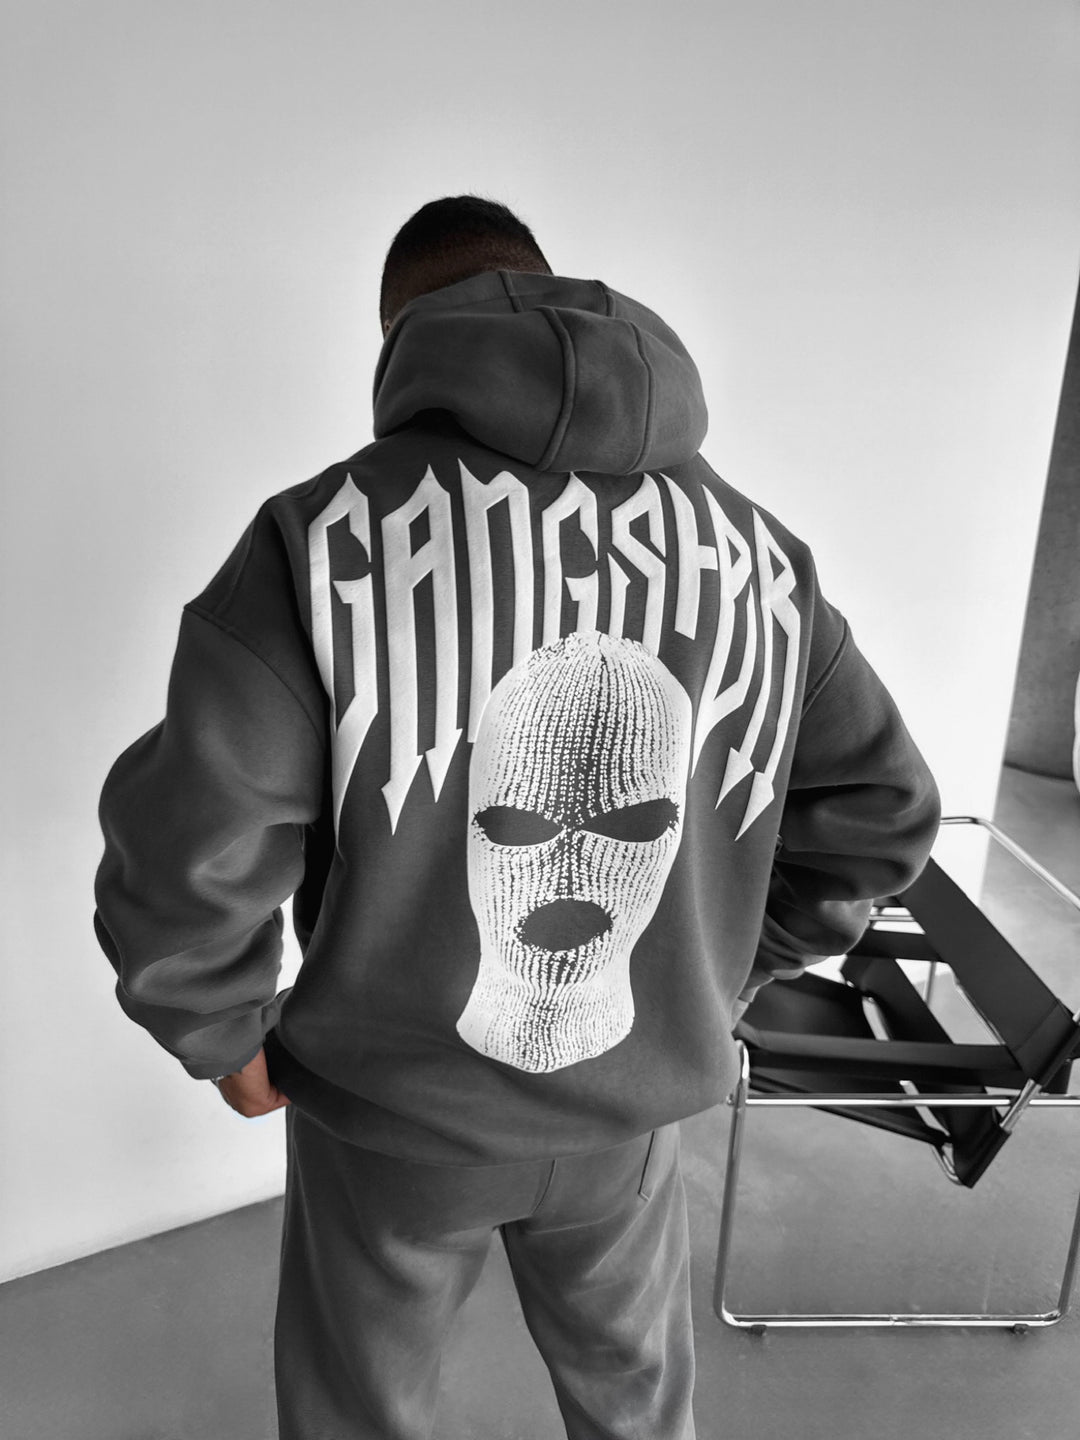 Oversize Gangster Hoodie - Anthracite